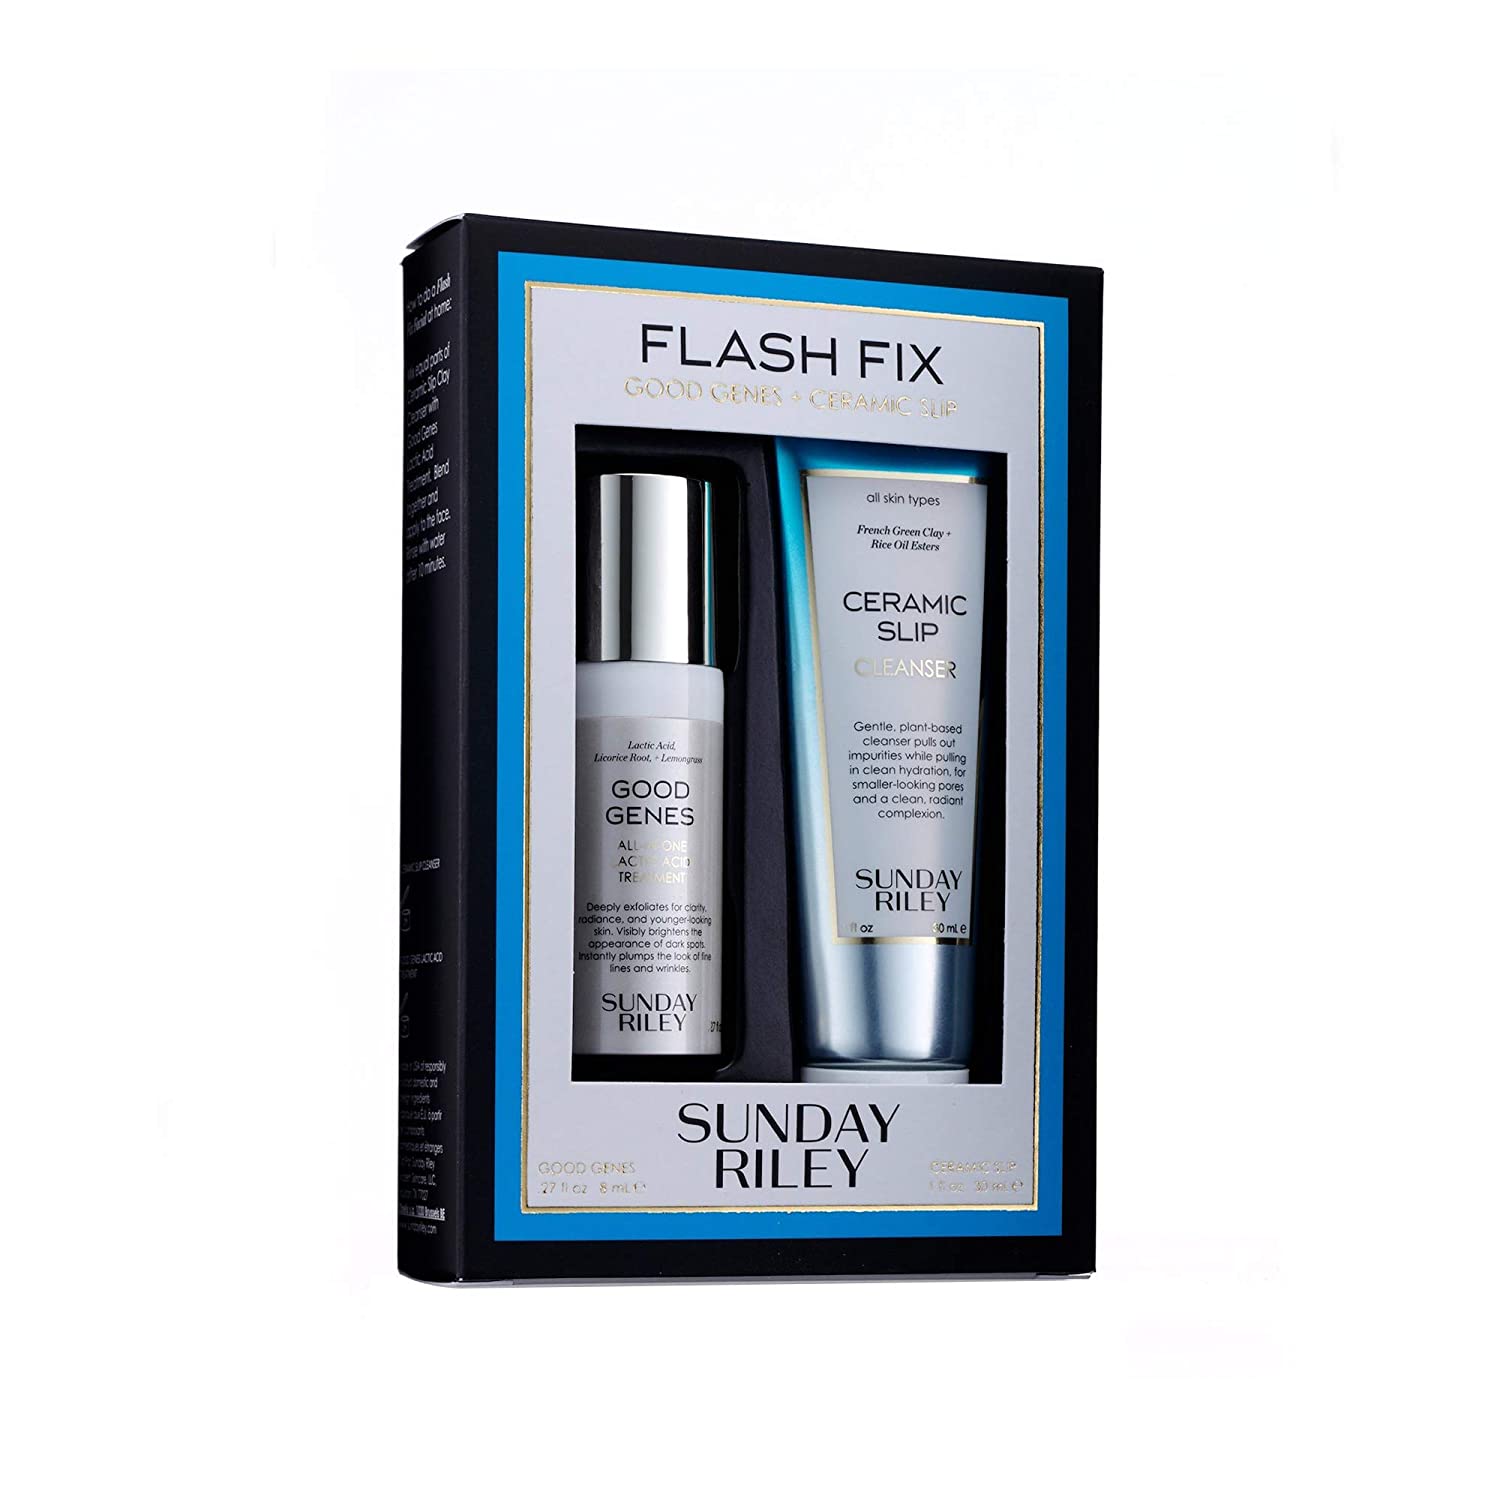 2-Piece Sunday Riley Flash Fix Good Genes All-in-One Face Treatment & Ceramic Slip Cleanser Kit $12.50 + Free S&H w/ Prime or $25+